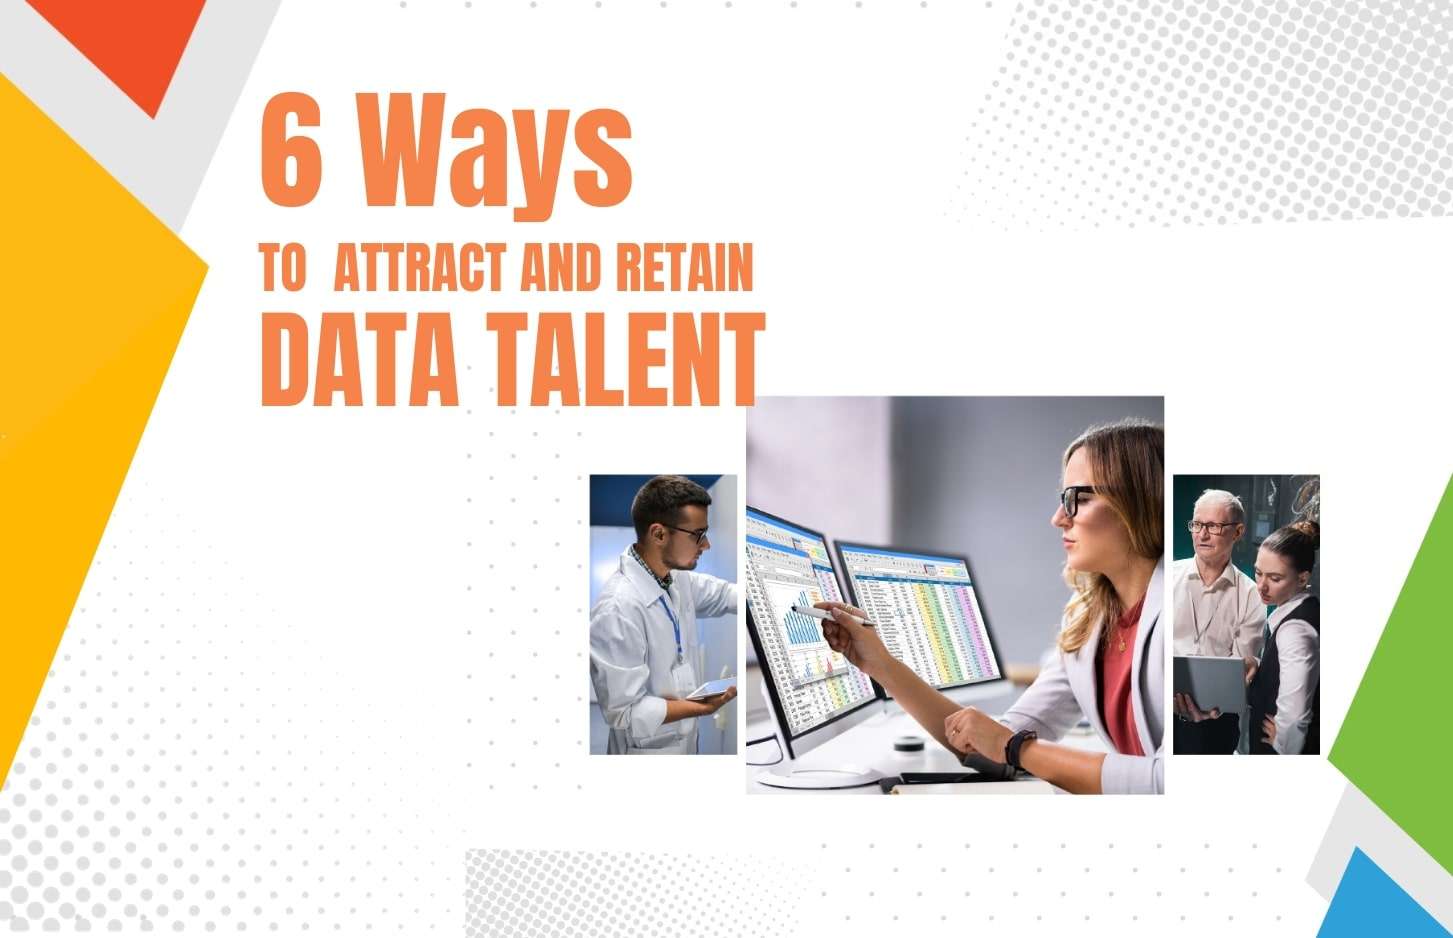 6 Ways to Attract and Retain Data Talent